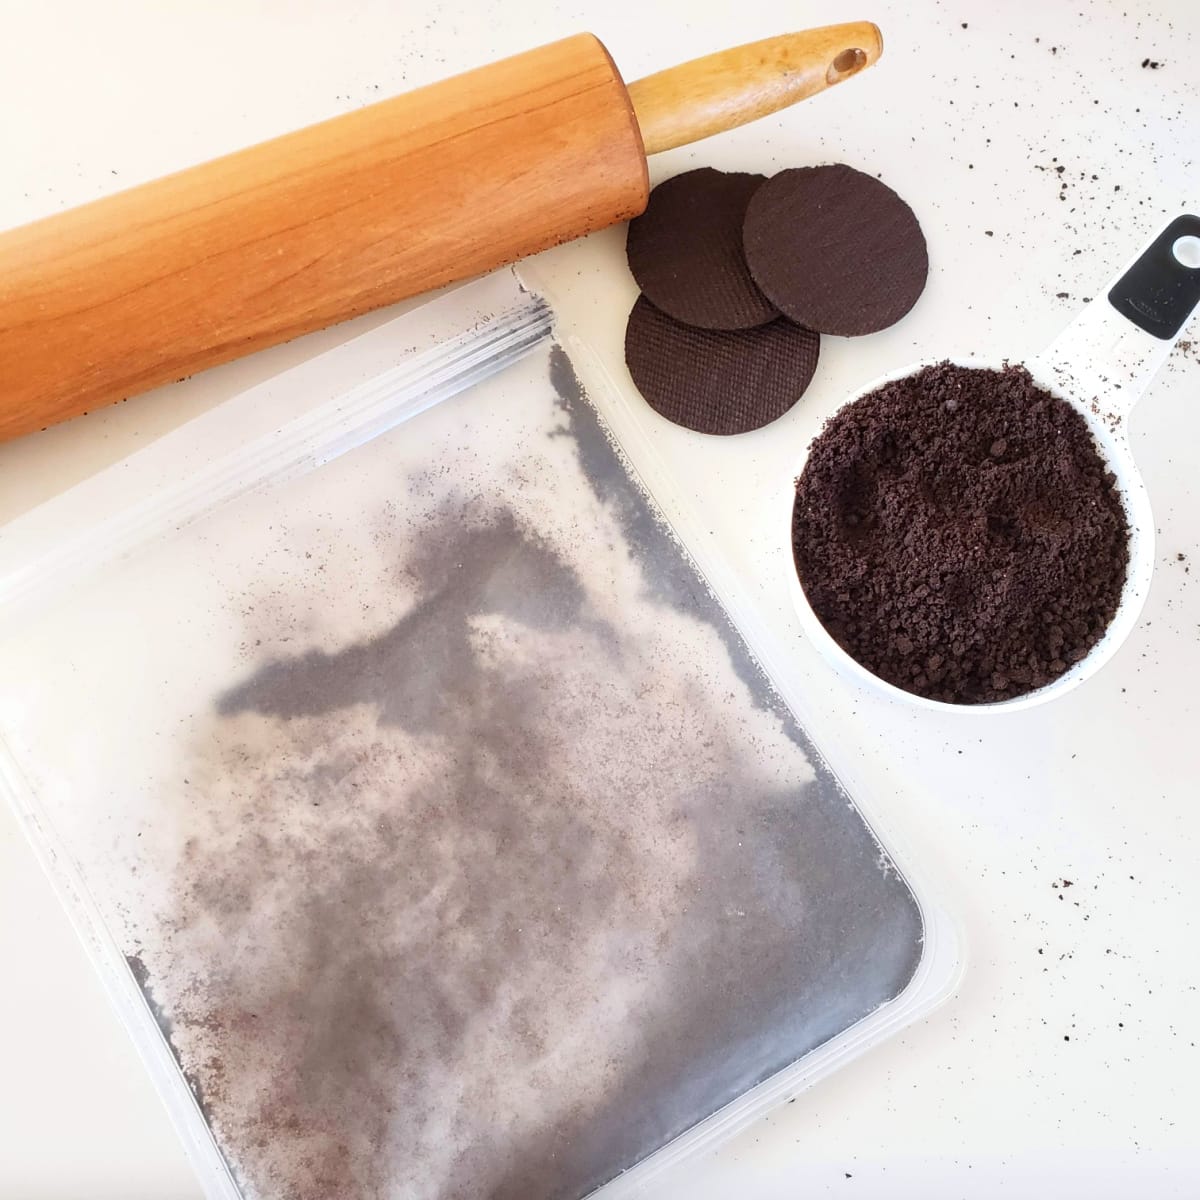 Chocolate wafers being crushed in a plastic bag with a rolling pin at the top